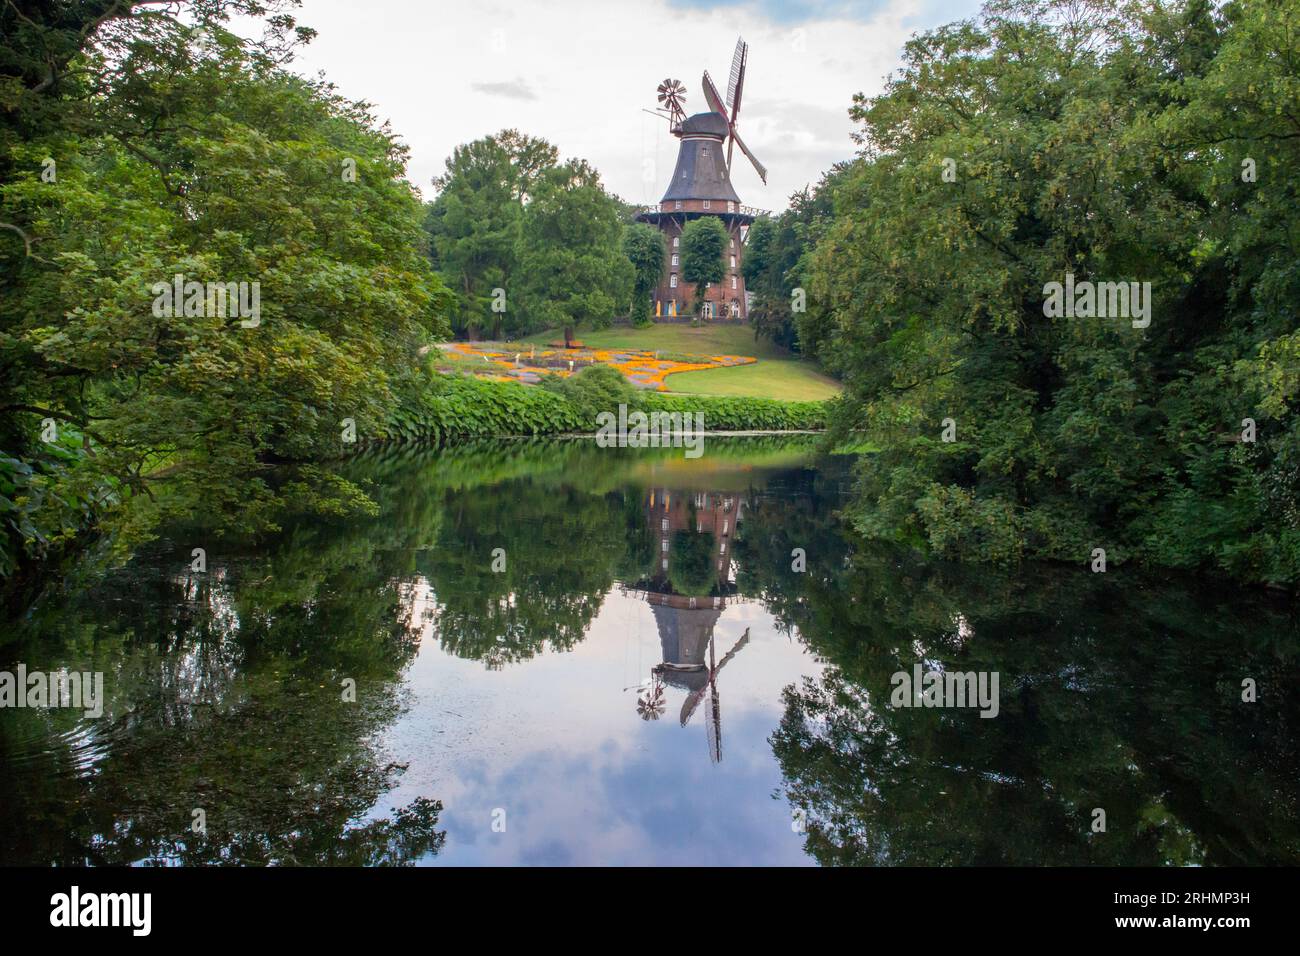 Am Wall Windmill in summer park with pond. Windmill with reflection in water in city garden. Historic architecture in Bremen. Rural german landmark. Stock Photo